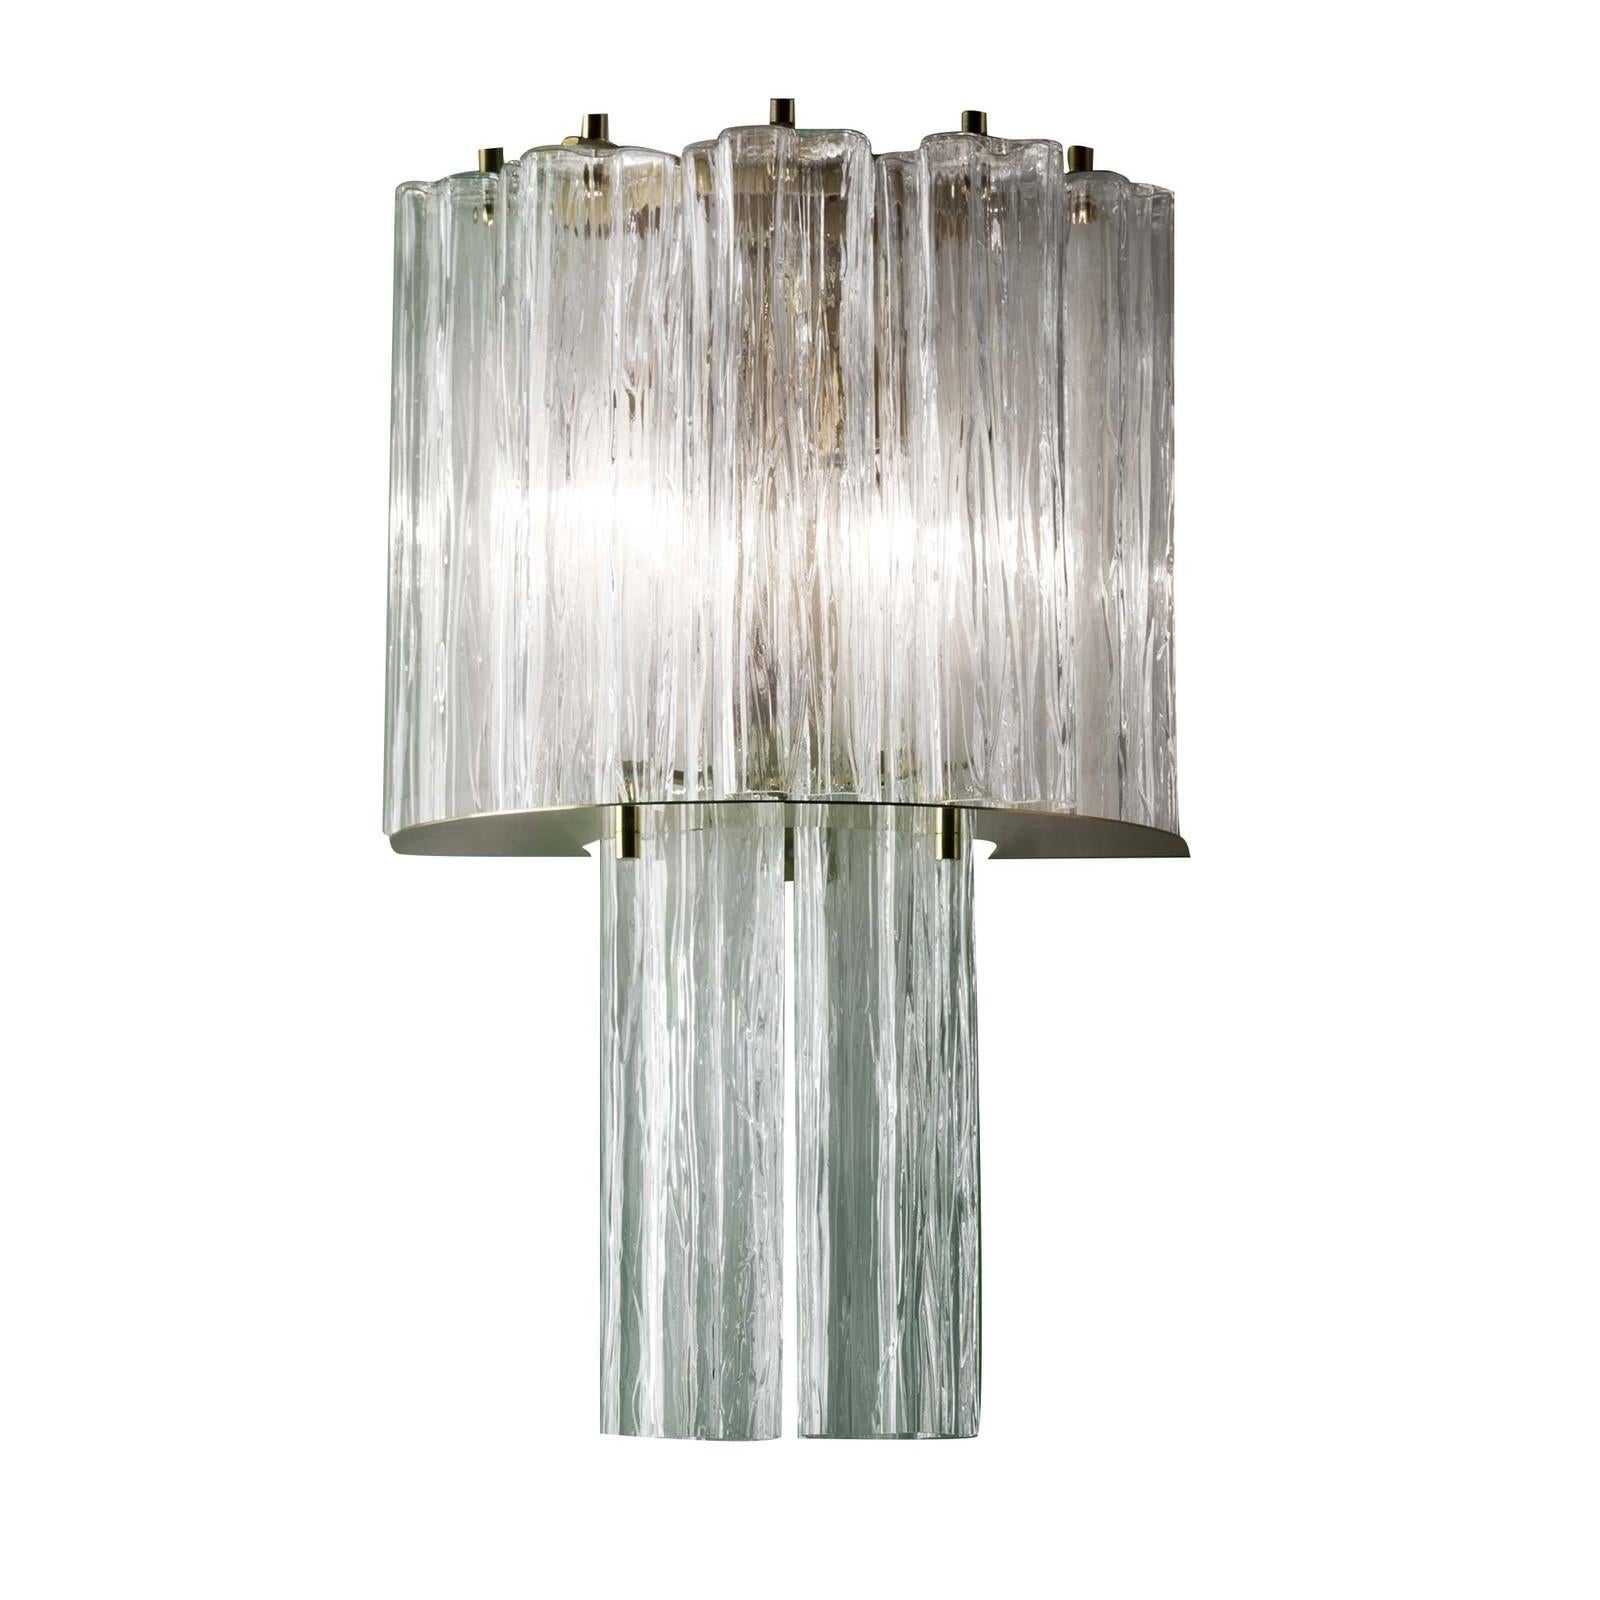 Part of the Home Couture collection, this super sconce is a splendid interpretation of Art Deco glamour. Its structure in metal with a brass finish creates two layers of diffusers in glass that create the effect of a precious jewel mounted on the